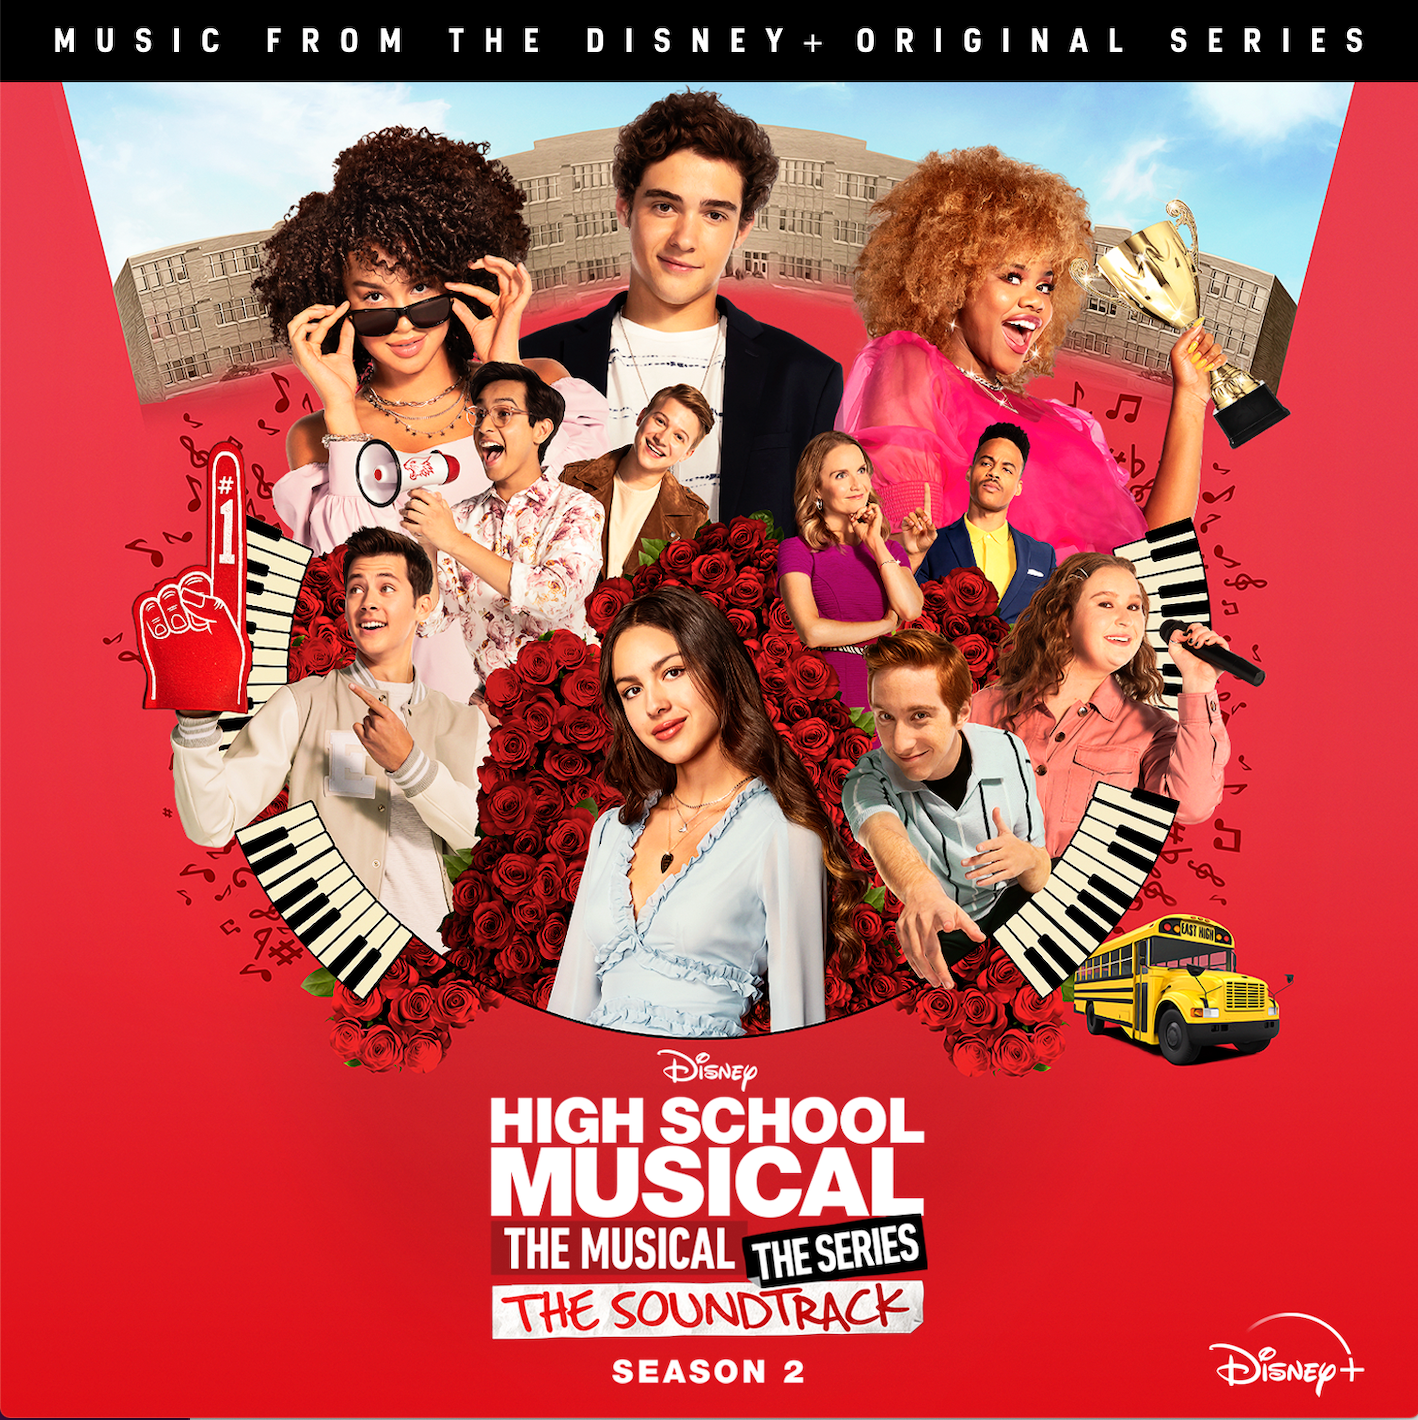 Cast of High School Musical: The Musical: The Series, Disney - High School Musical: The Musical: The Series - CD